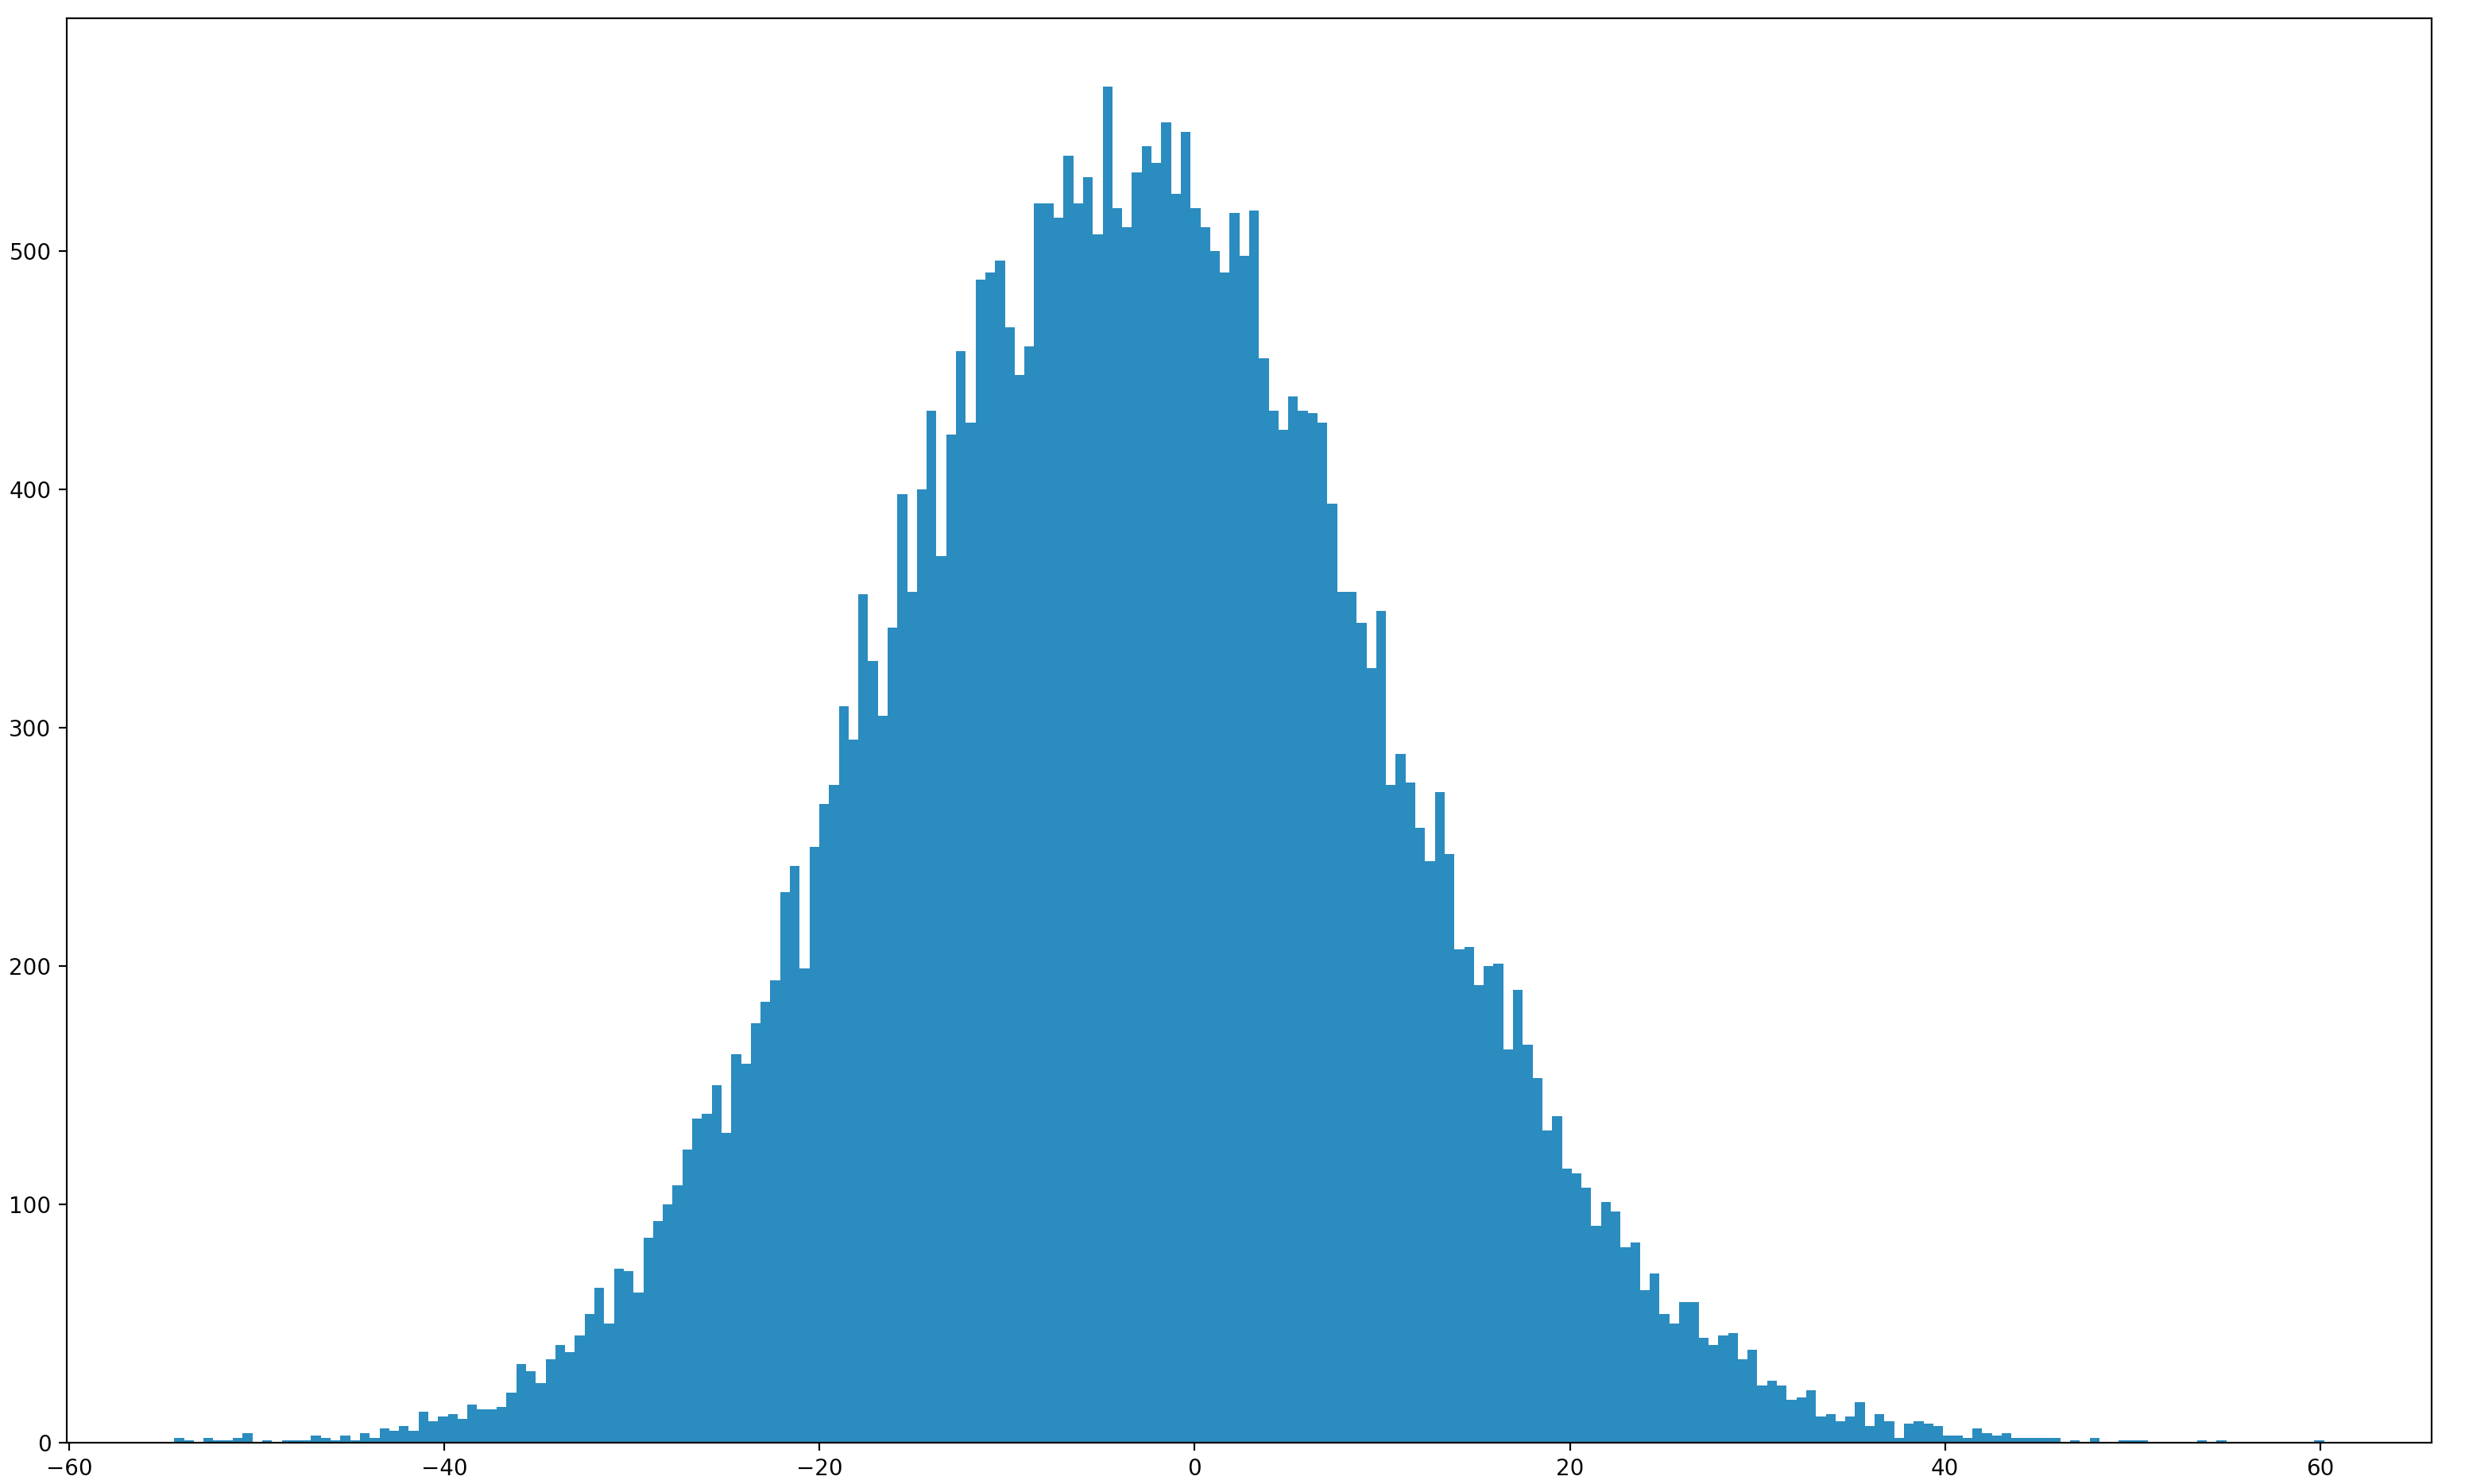 A histogram of the path energies &dash; the original motivation for the work